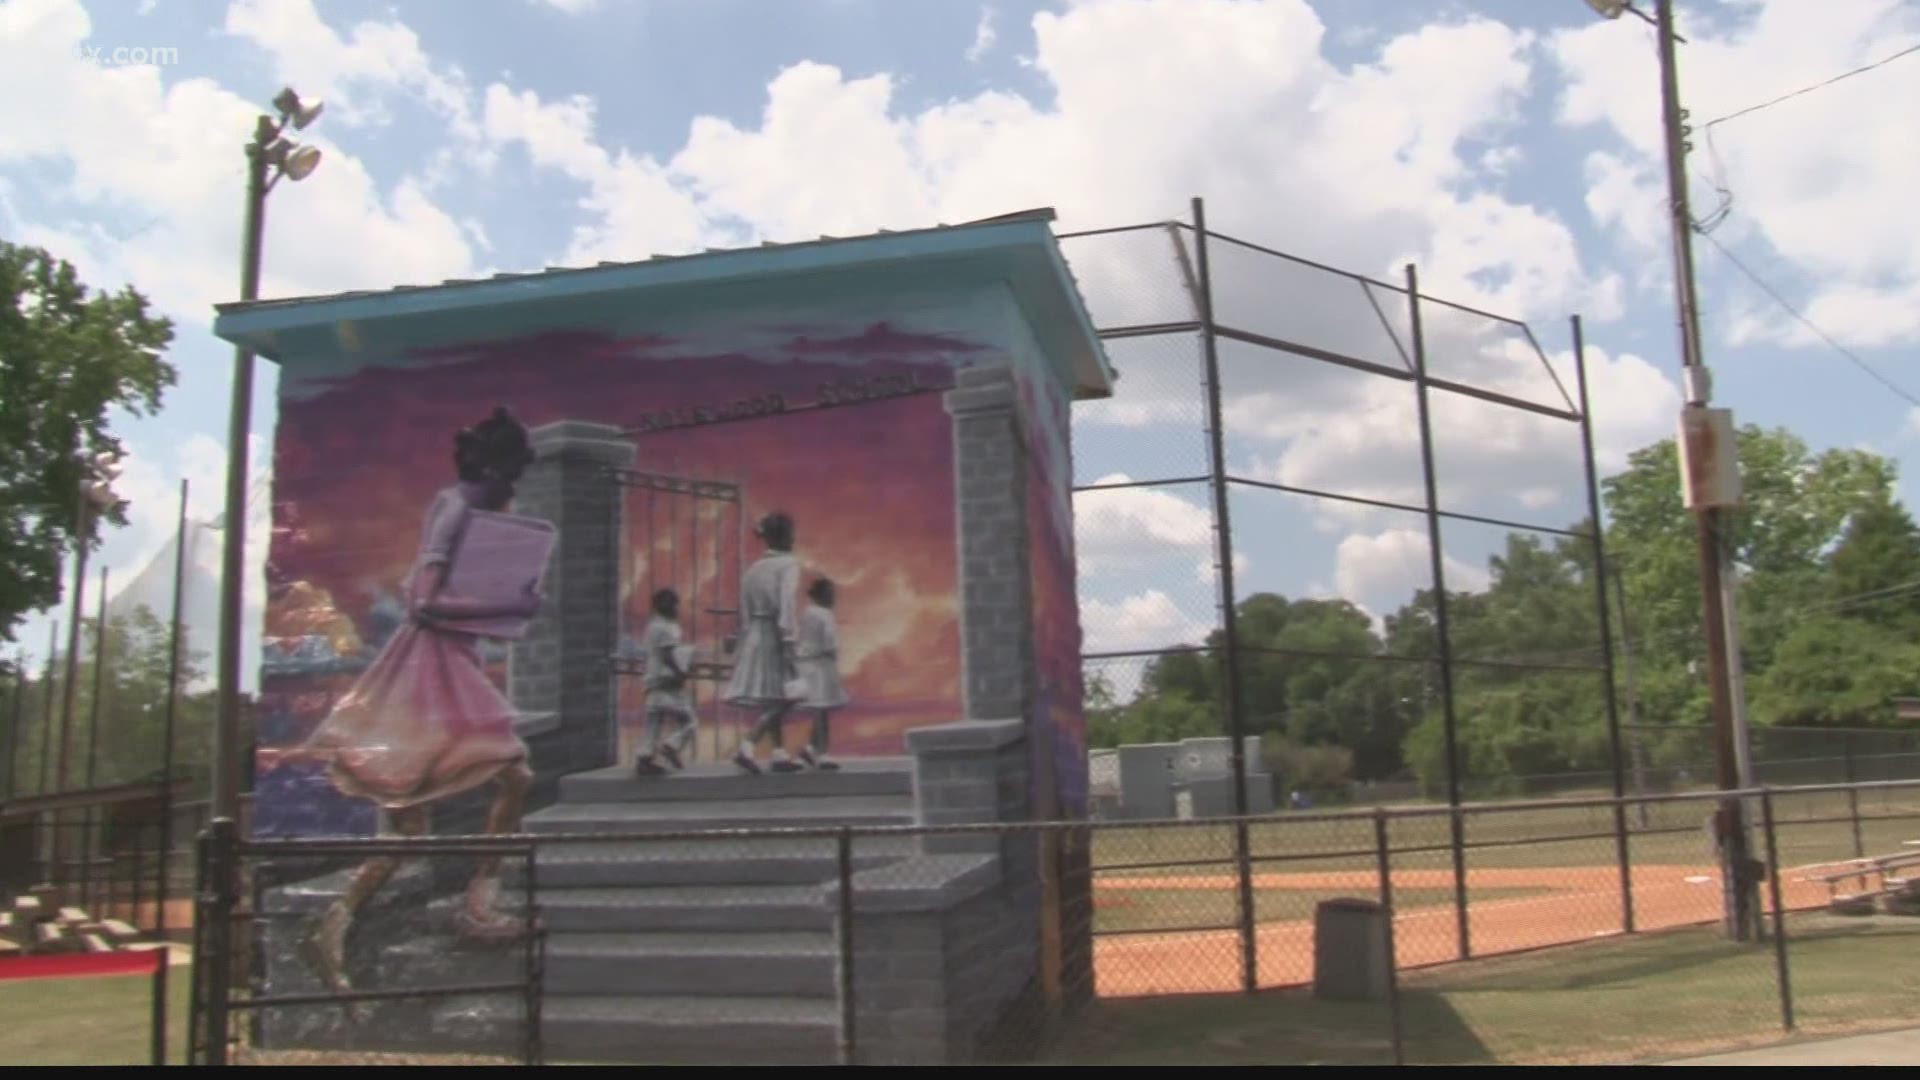 Valencia park in the Rosewood neighborhood is now home to a new mural.